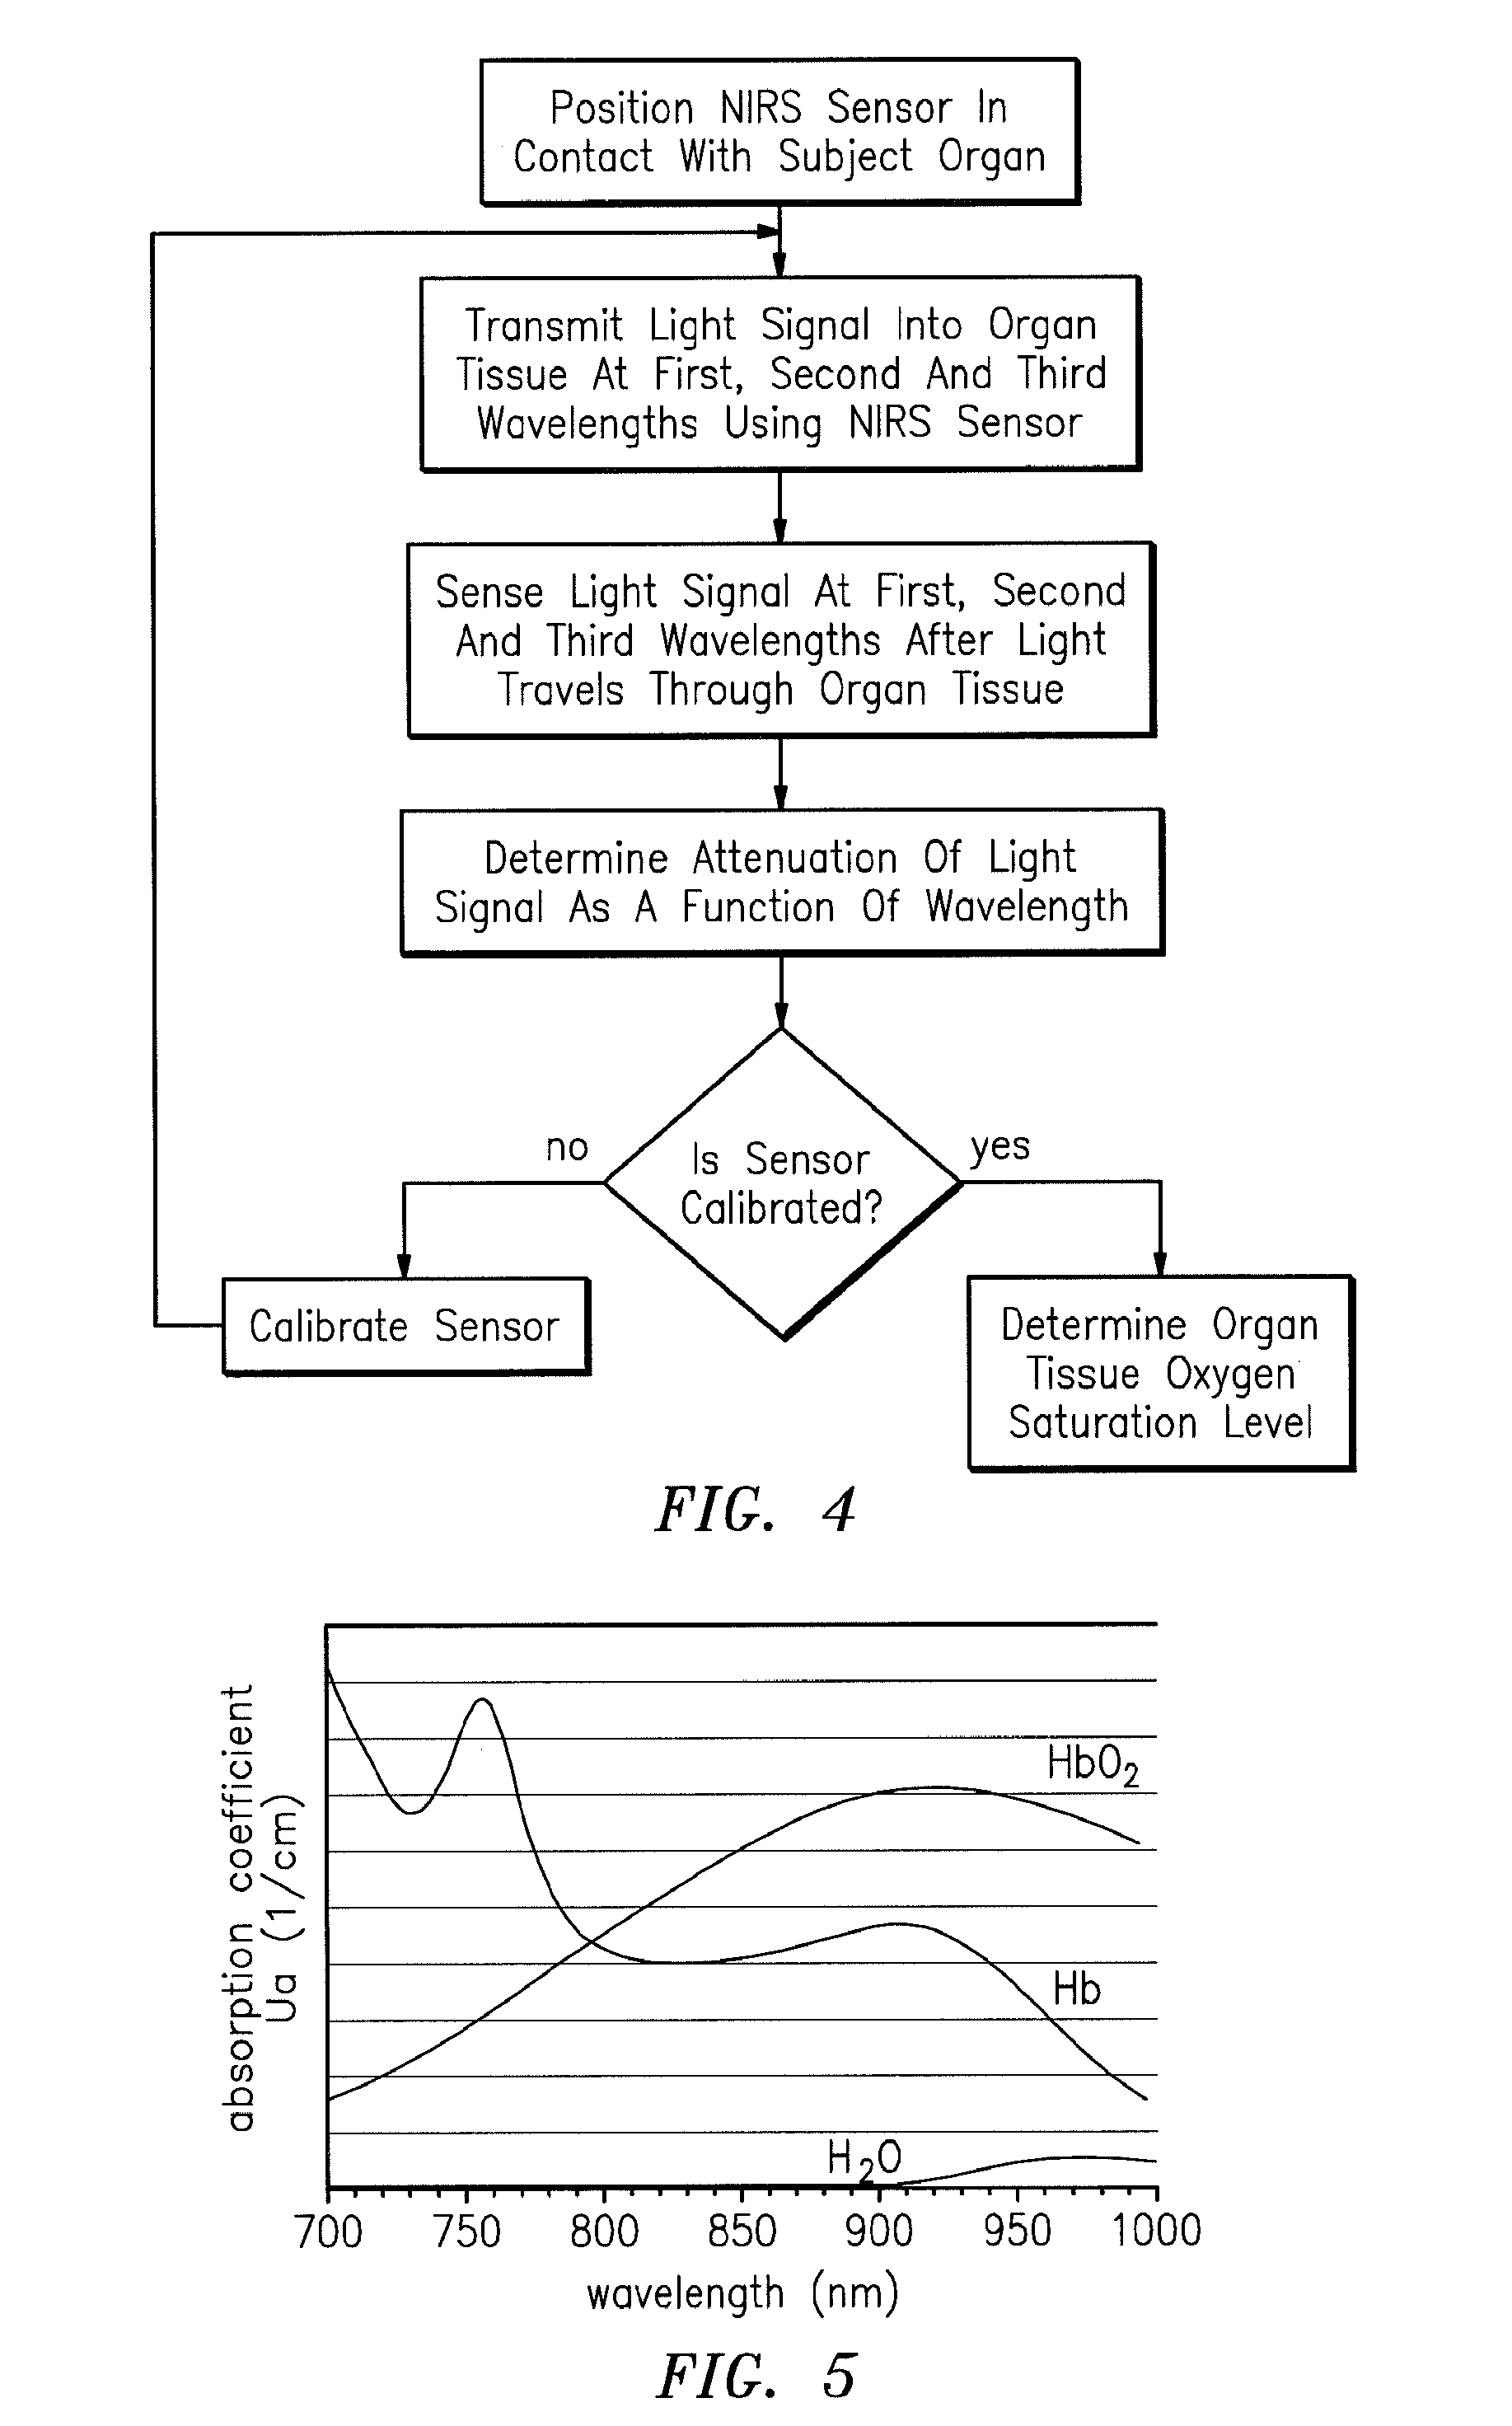 Method for spectrophotometric blood oxygenation monitoring of organs in the body